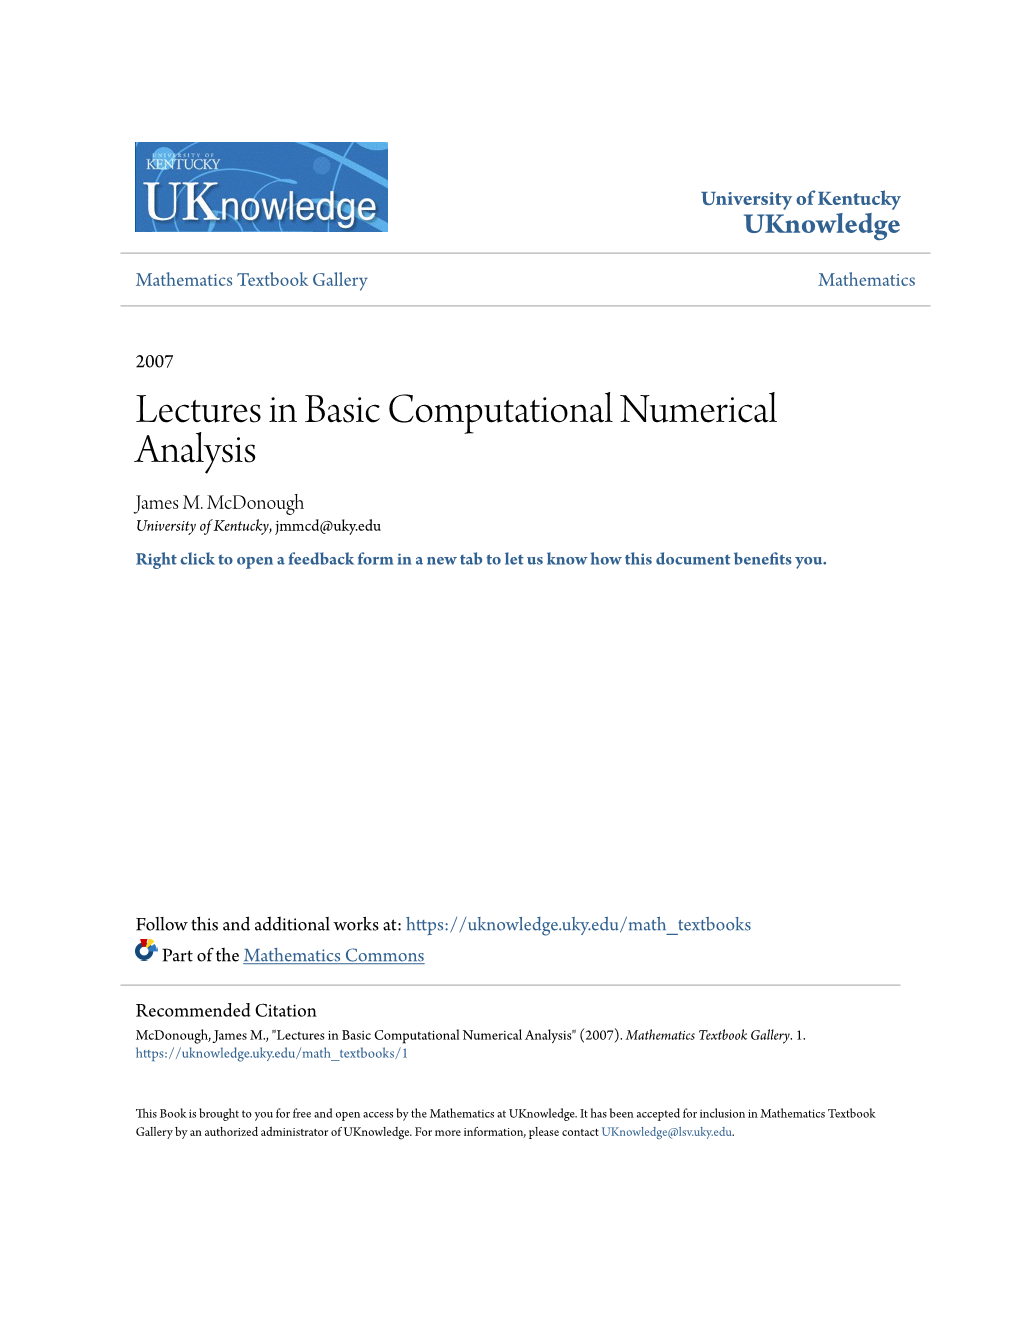 Lectures in Basic Computational Numerical Analysis James M